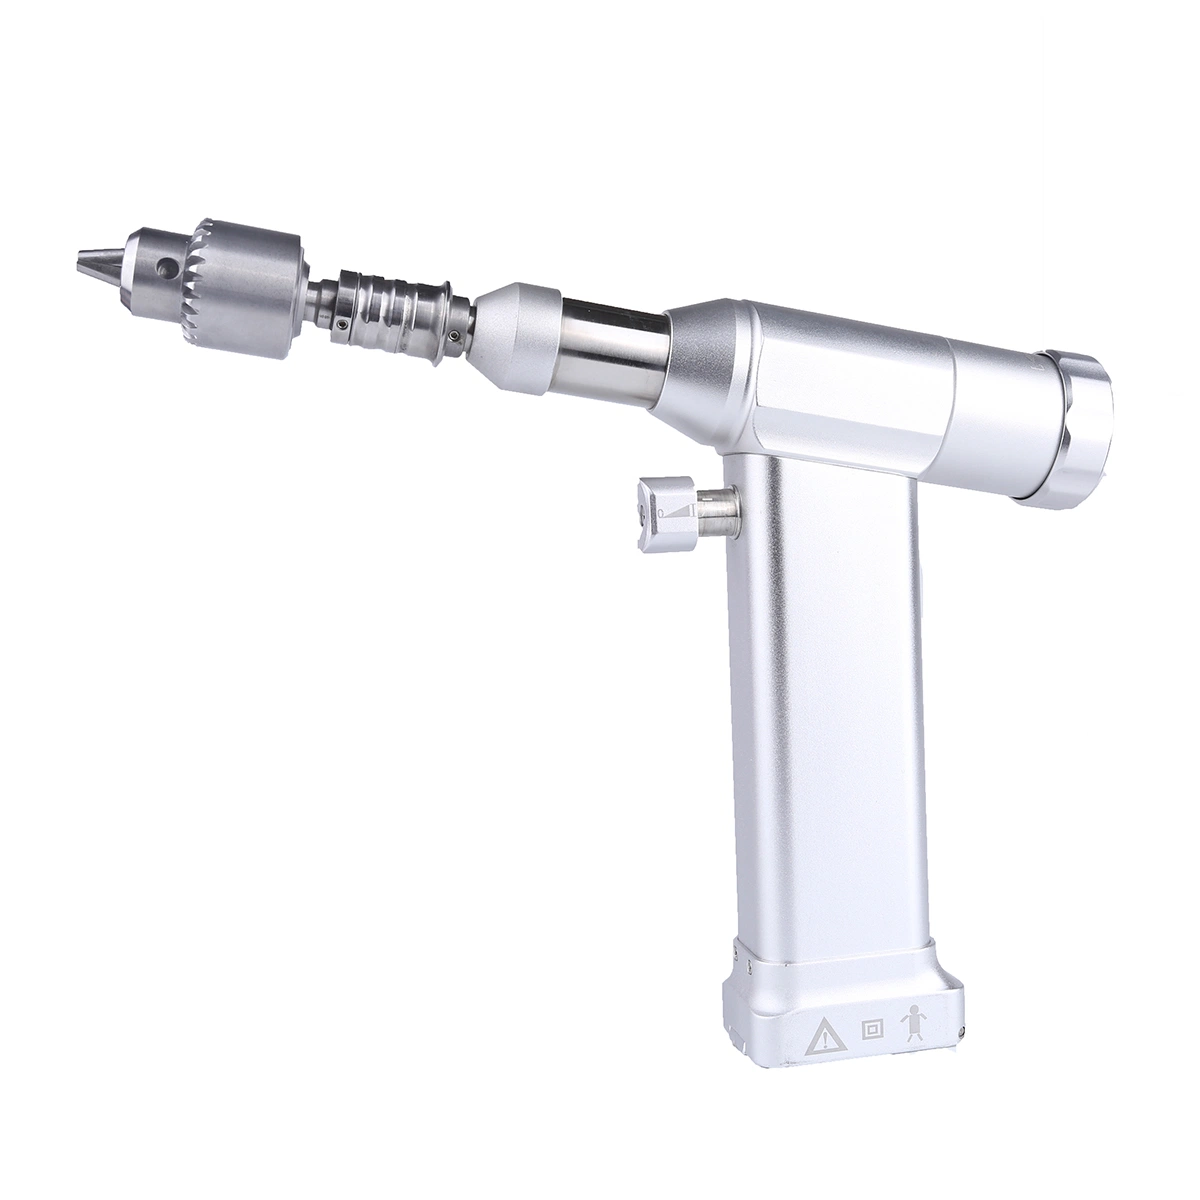 Large Torque Drill Surgery Orthopedic Power Drill Surgical Instruments